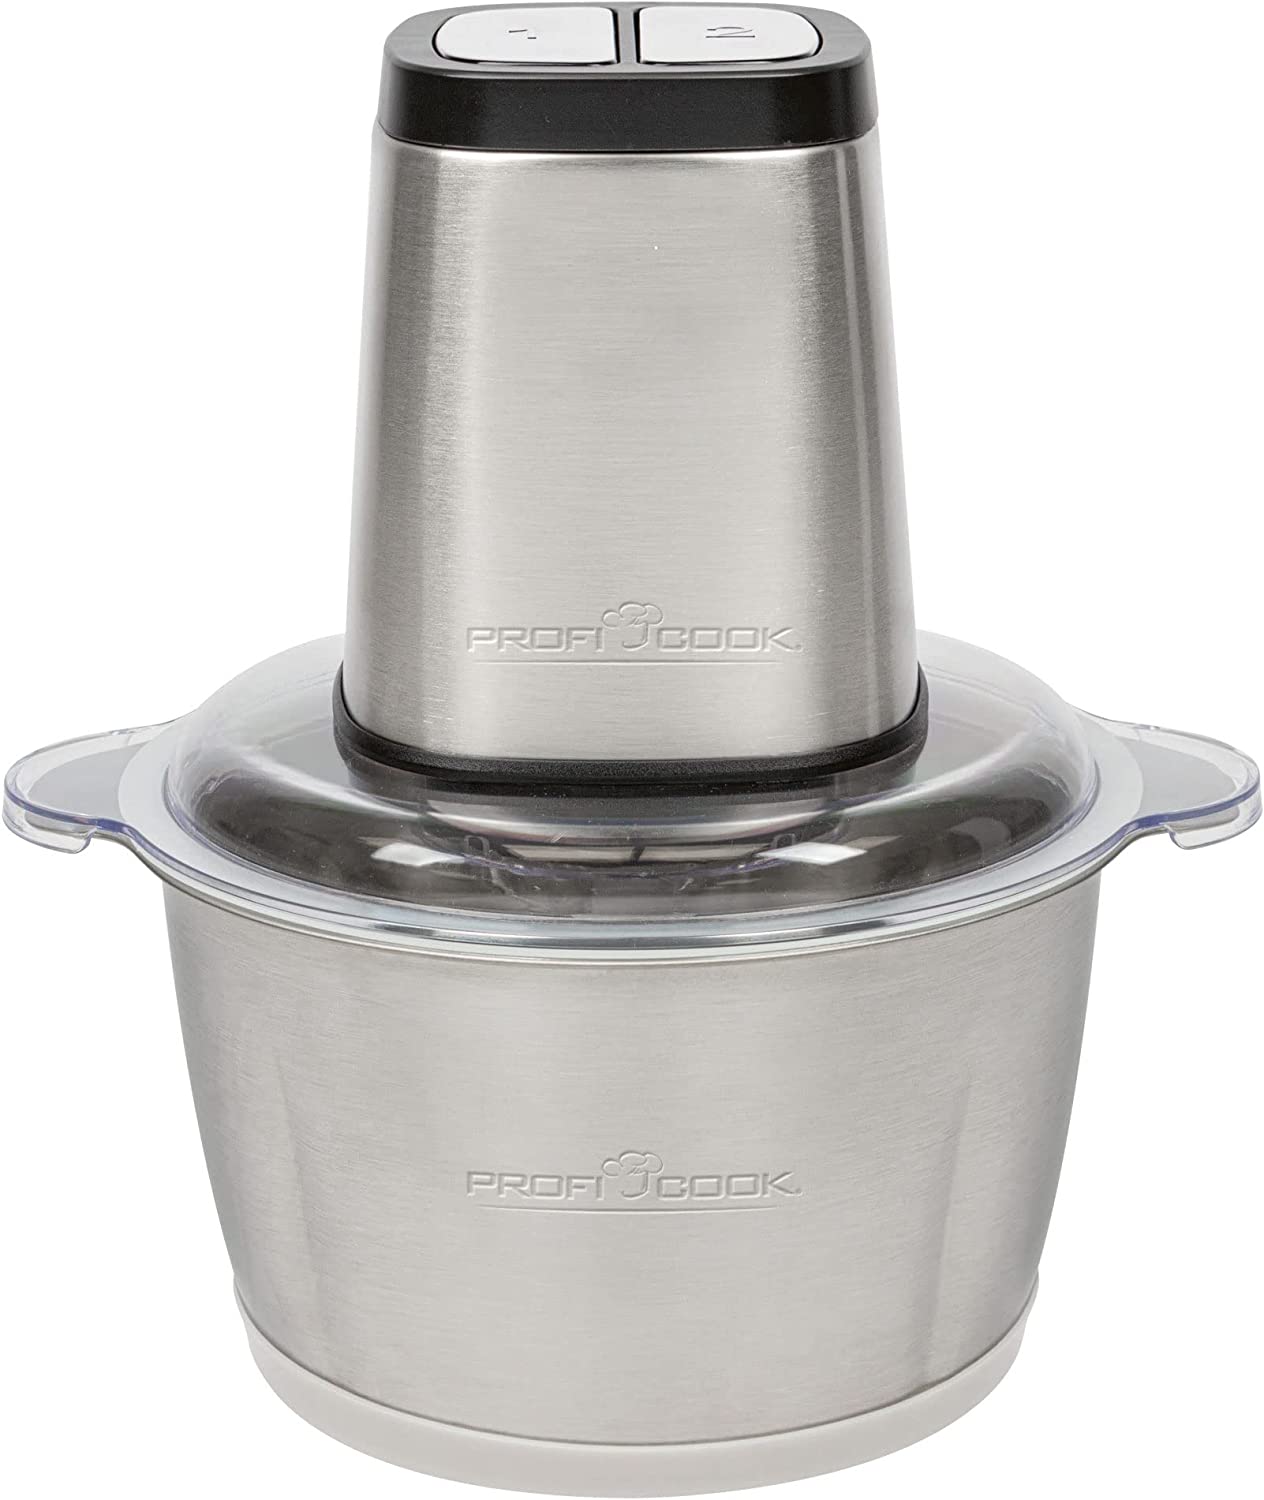 ProfiCook Electric Chopper, 2-in-1 Multi-Chopper and Ice Crusher Electric Stainless Steel with XL Container 1.7 L, Food Processor, Mixer/Chopper PC MZ 1227, 500 Watt